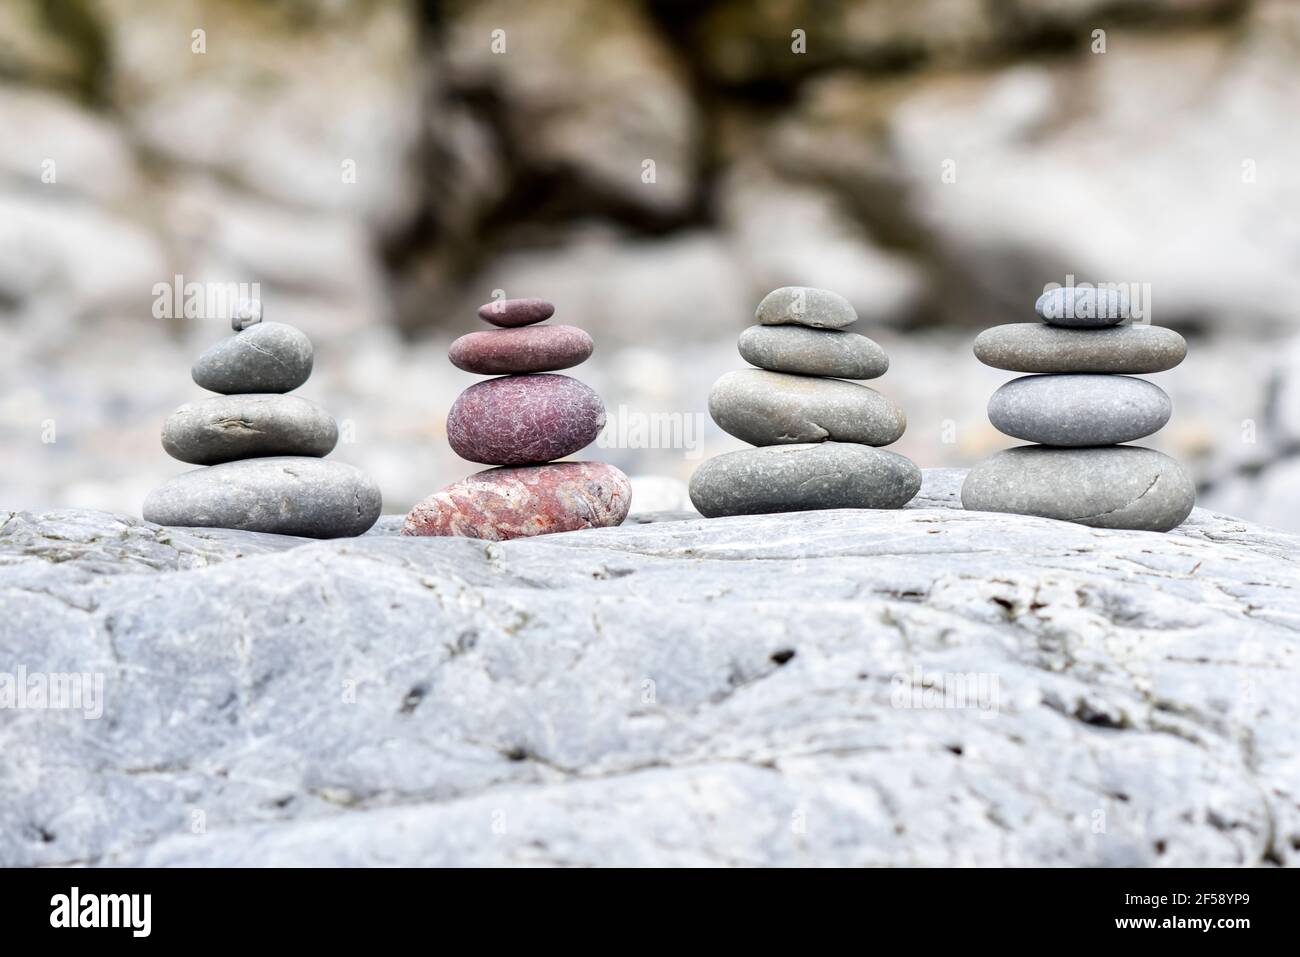 A background of pebbles by the ocean on the beach, a symbol of peace and relaxation. Stock Photo